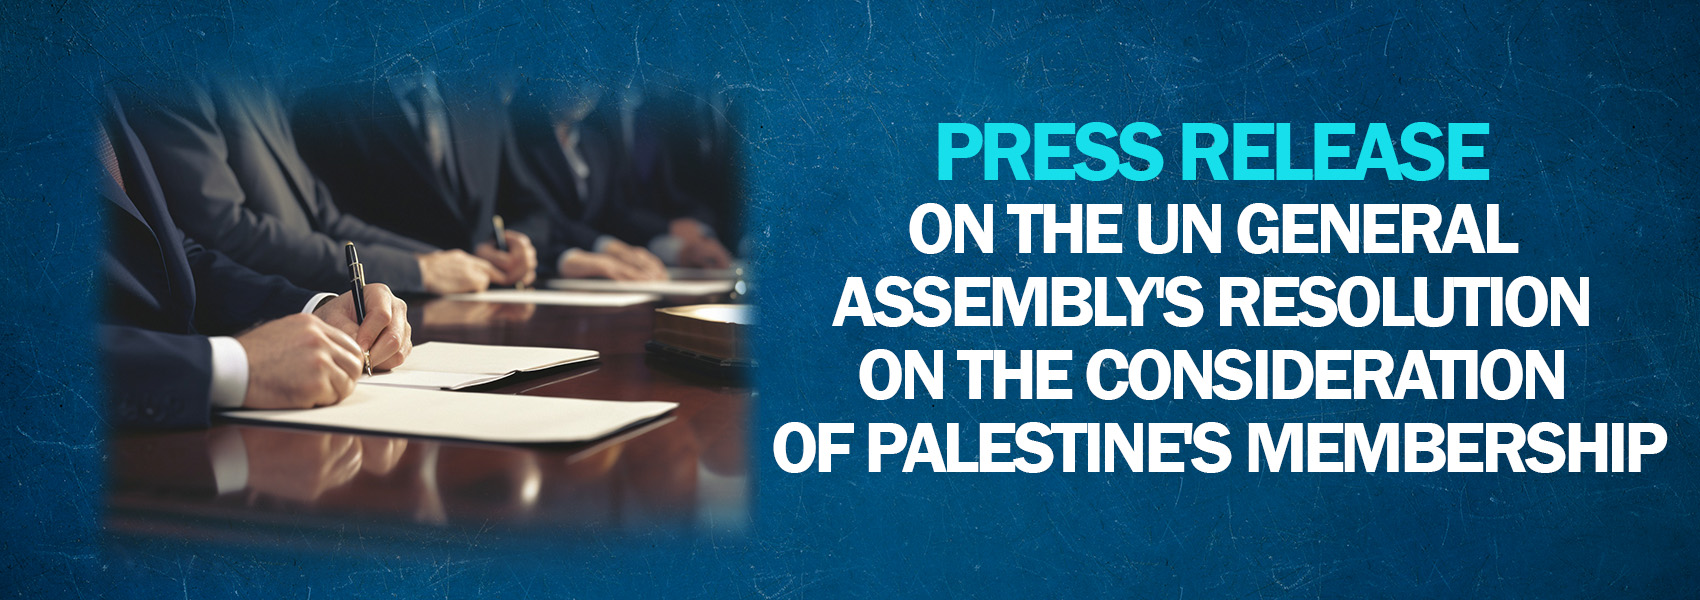 Press Release on the UN General Assembly's Resolution on the Consideration of Palestine's Membership